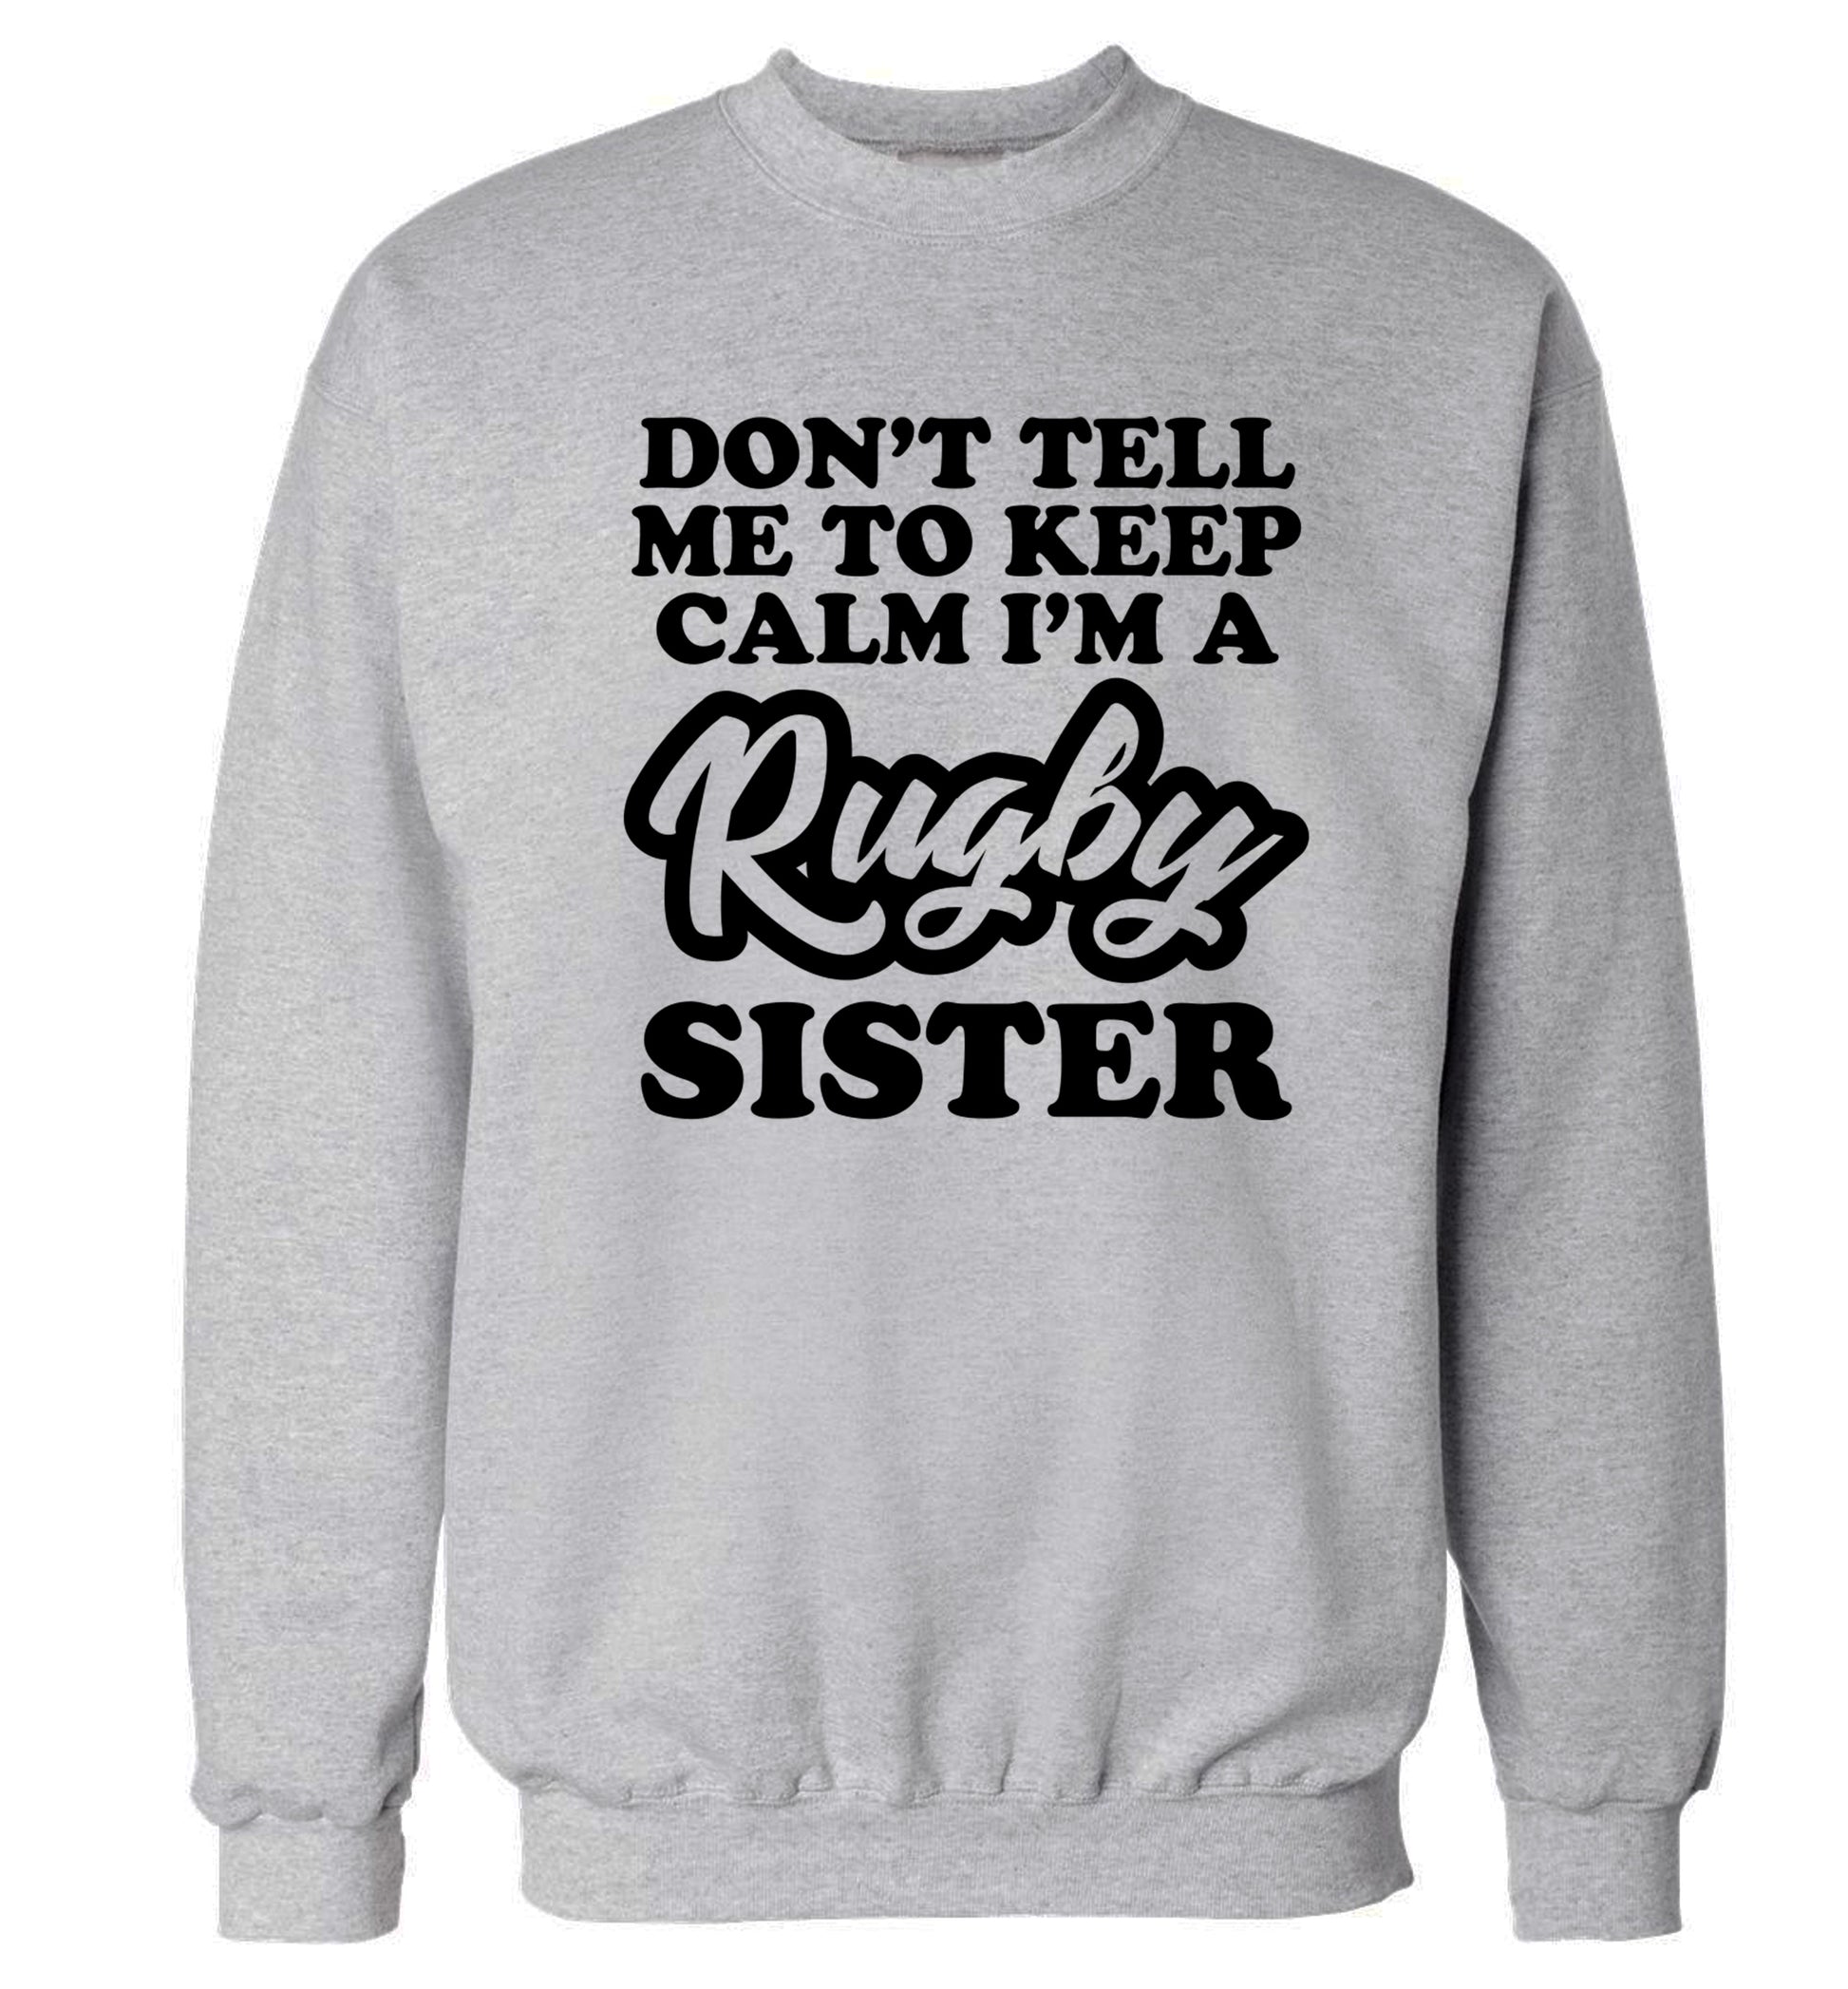 Don't tell me keep calm I'm a rugby sister Adult's unisex grey Sweater 2XL